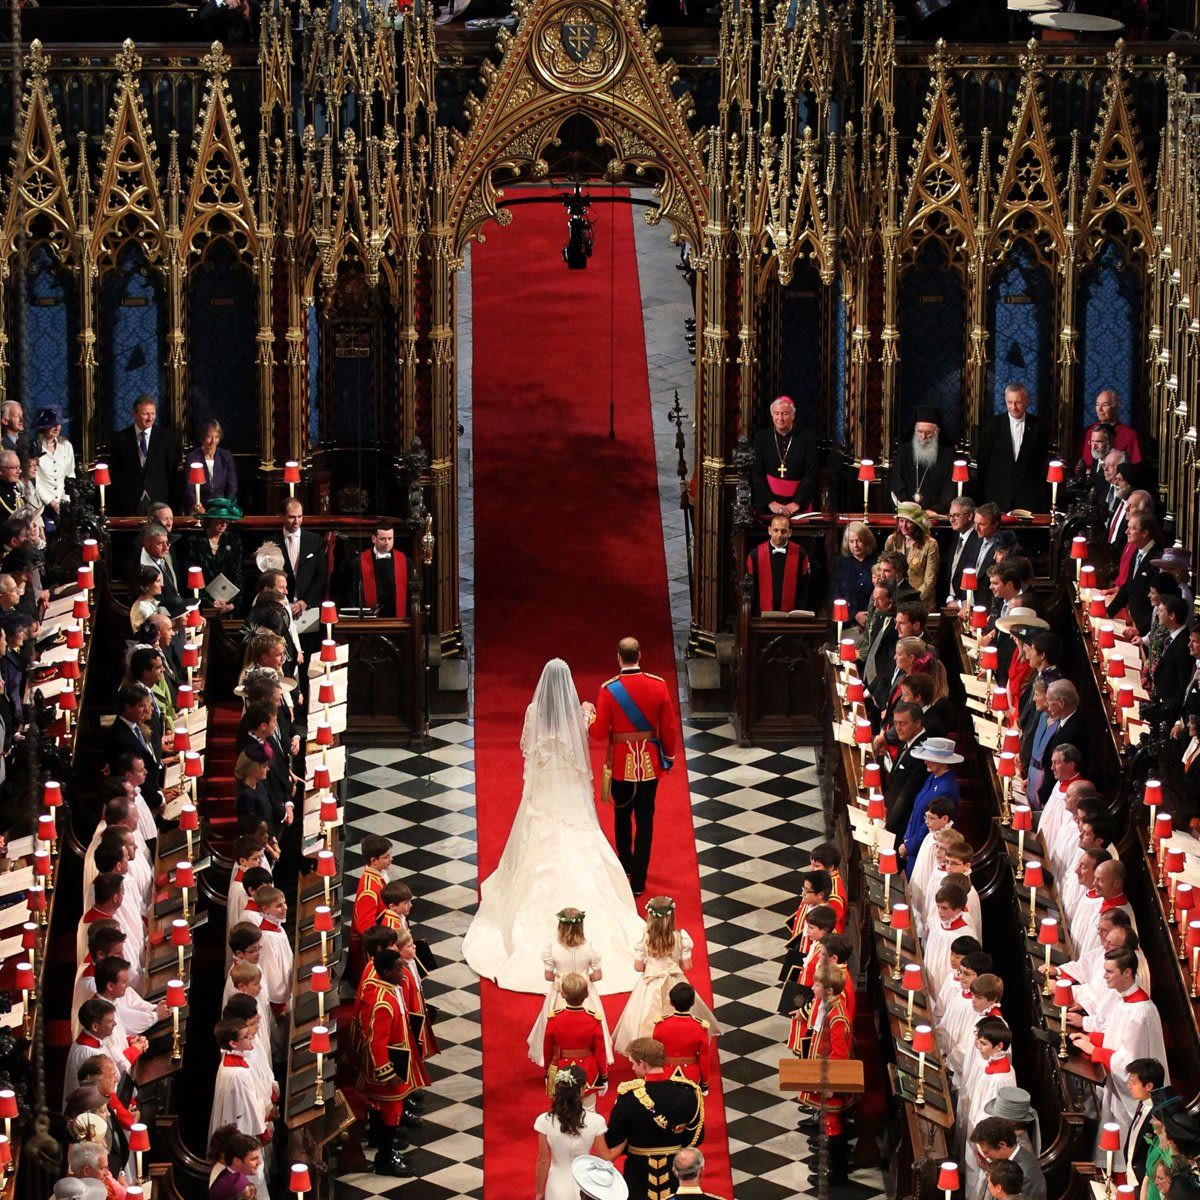 The royal couple got married at the Abbey on April 29, 2011